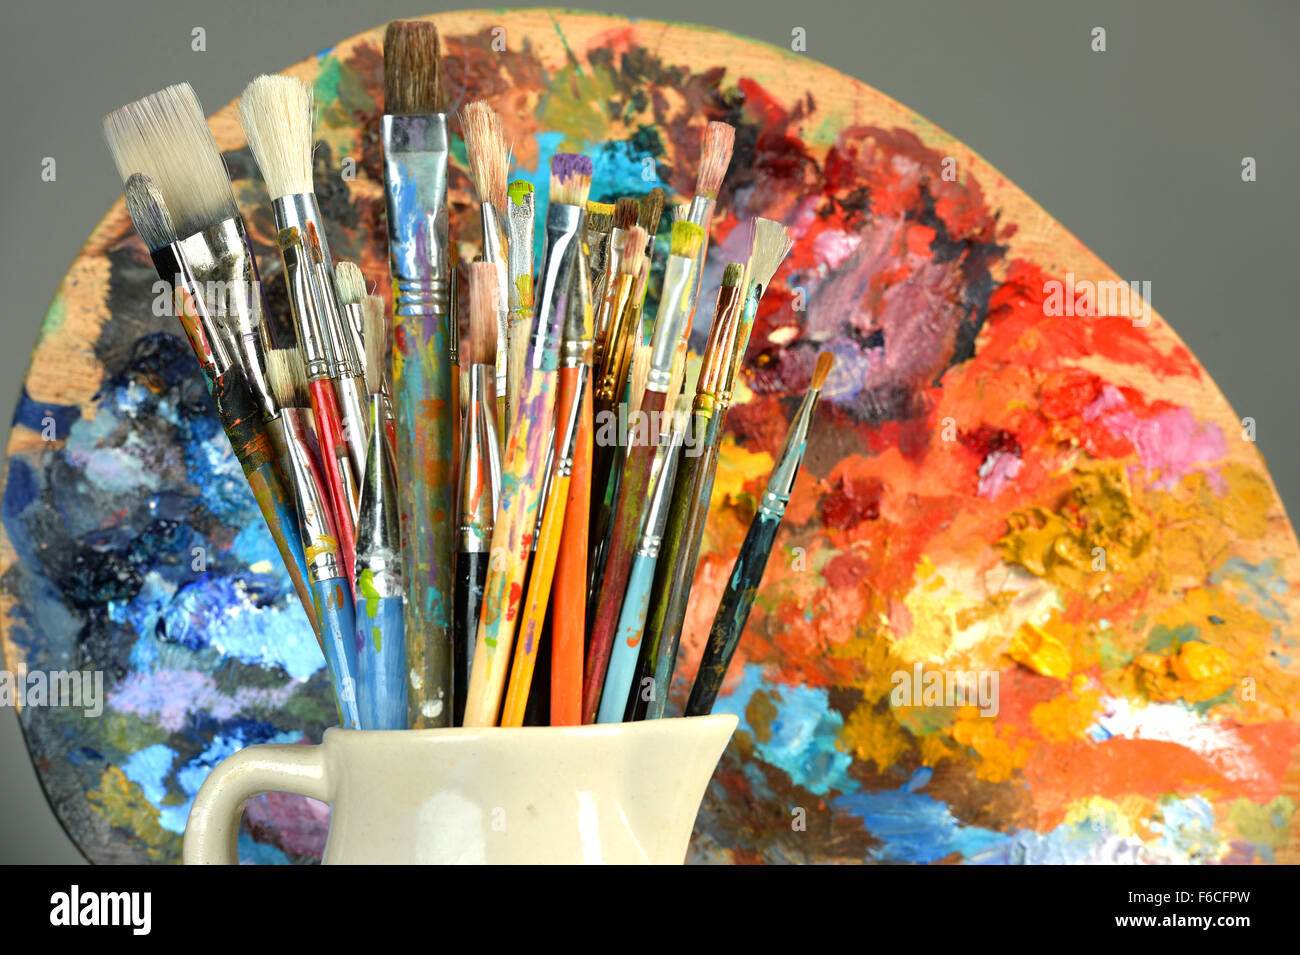 Paintbrushes and palette over gray background Stock Photo